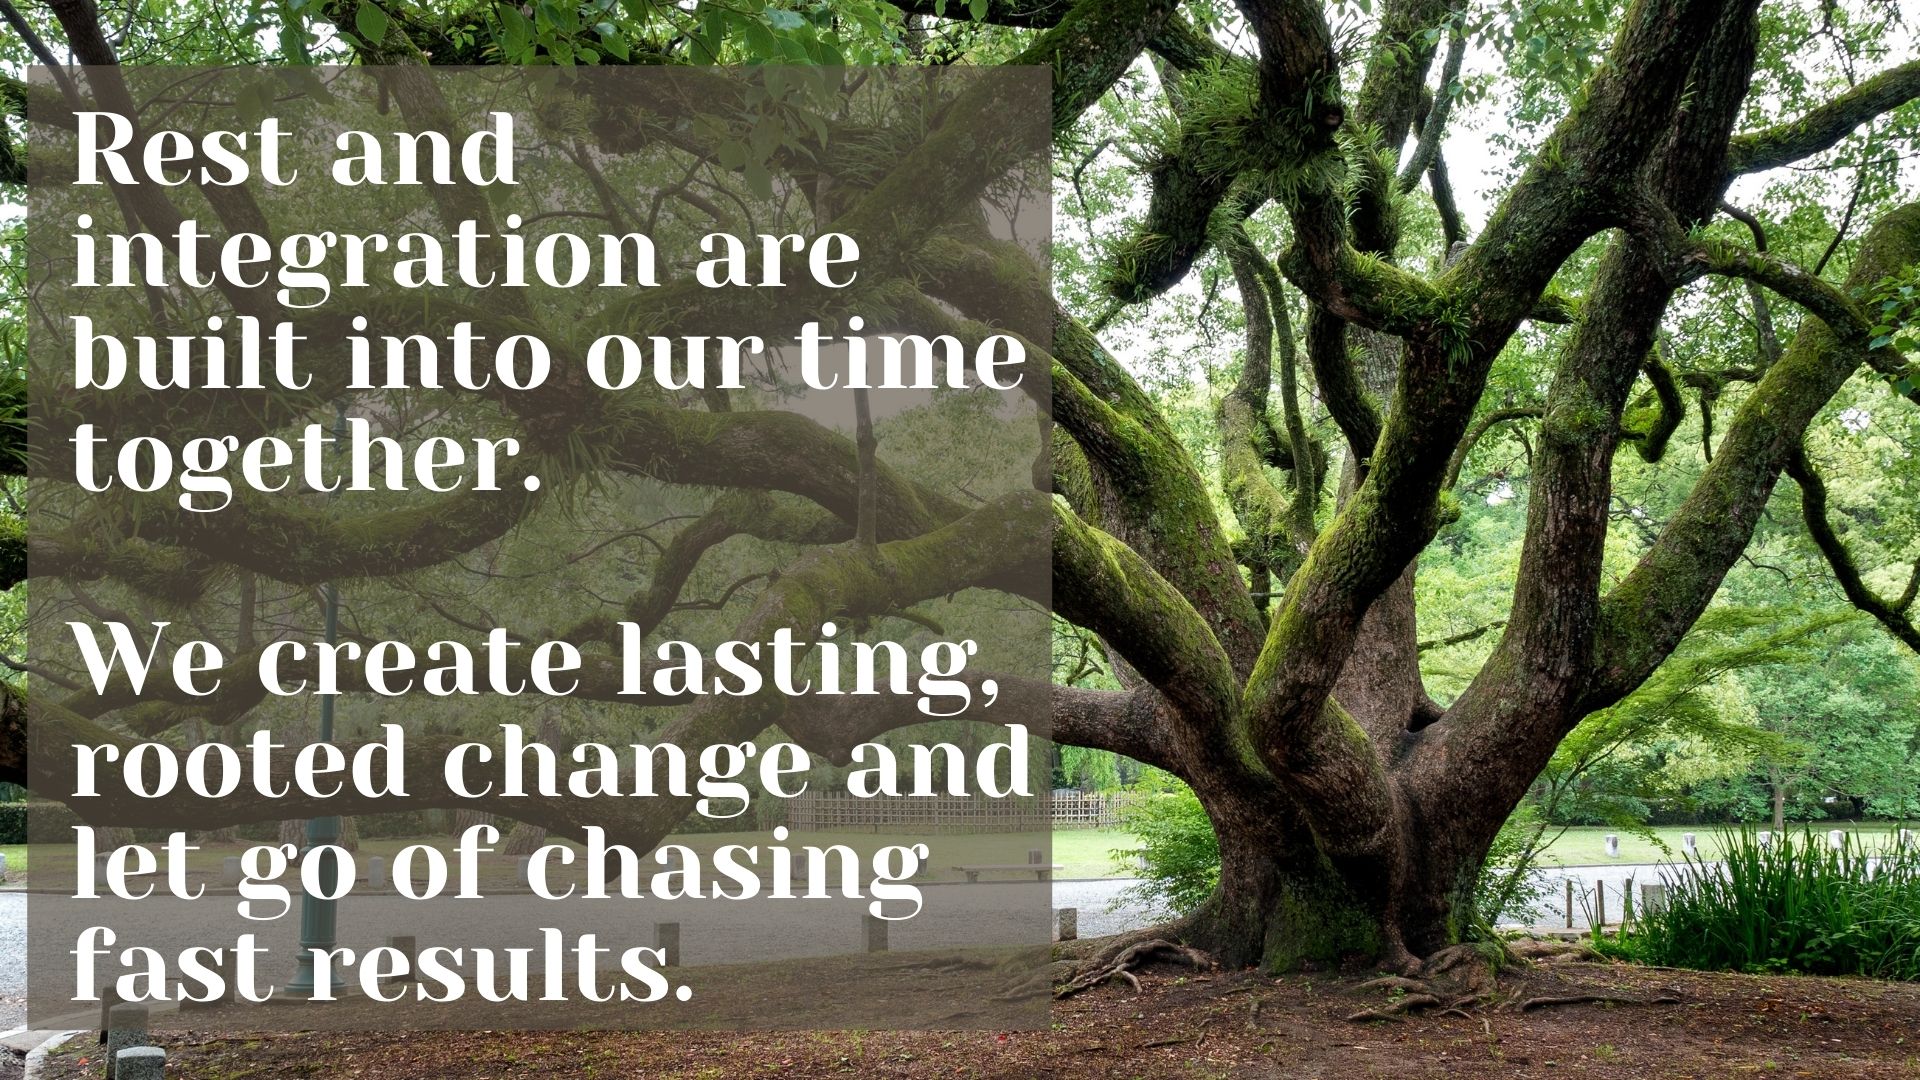 old oak tree with text " rest and integration are built into our time together.W